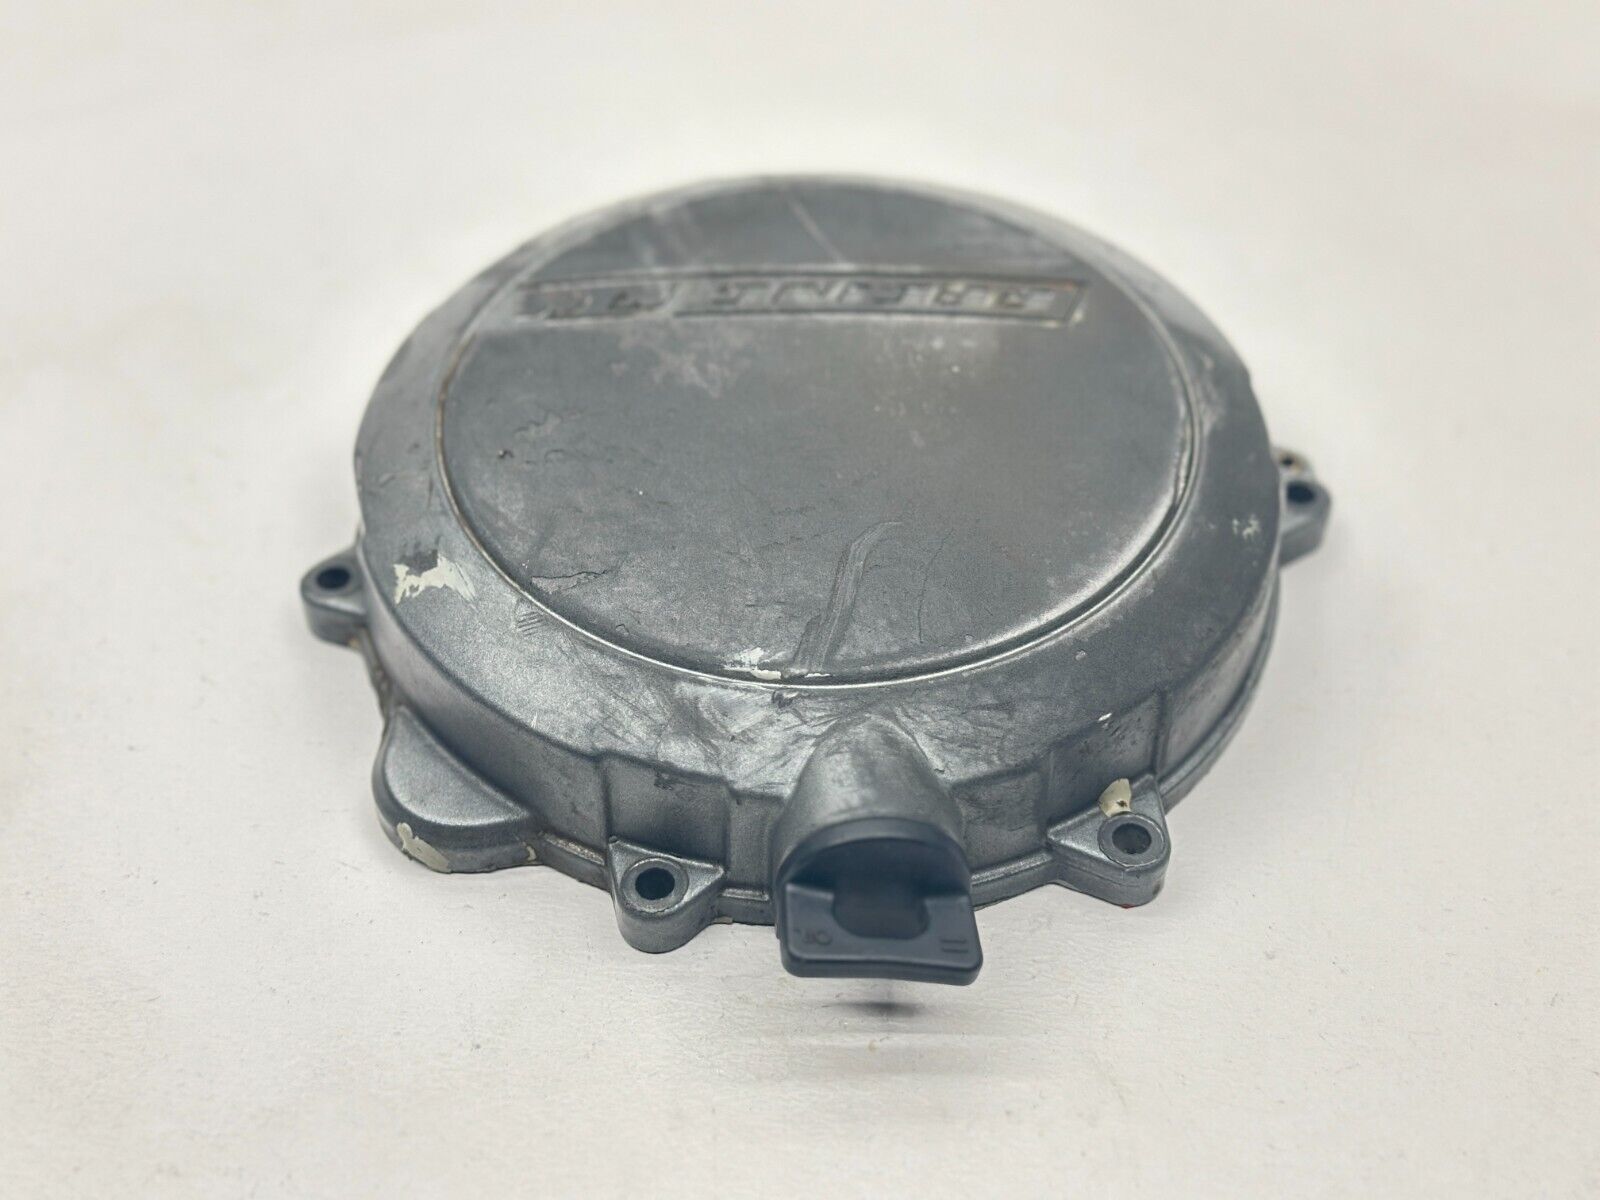 2008 KTM 300XC Clutch Cover Engine Motor OEM Outer Case 5513002600025 300 XC